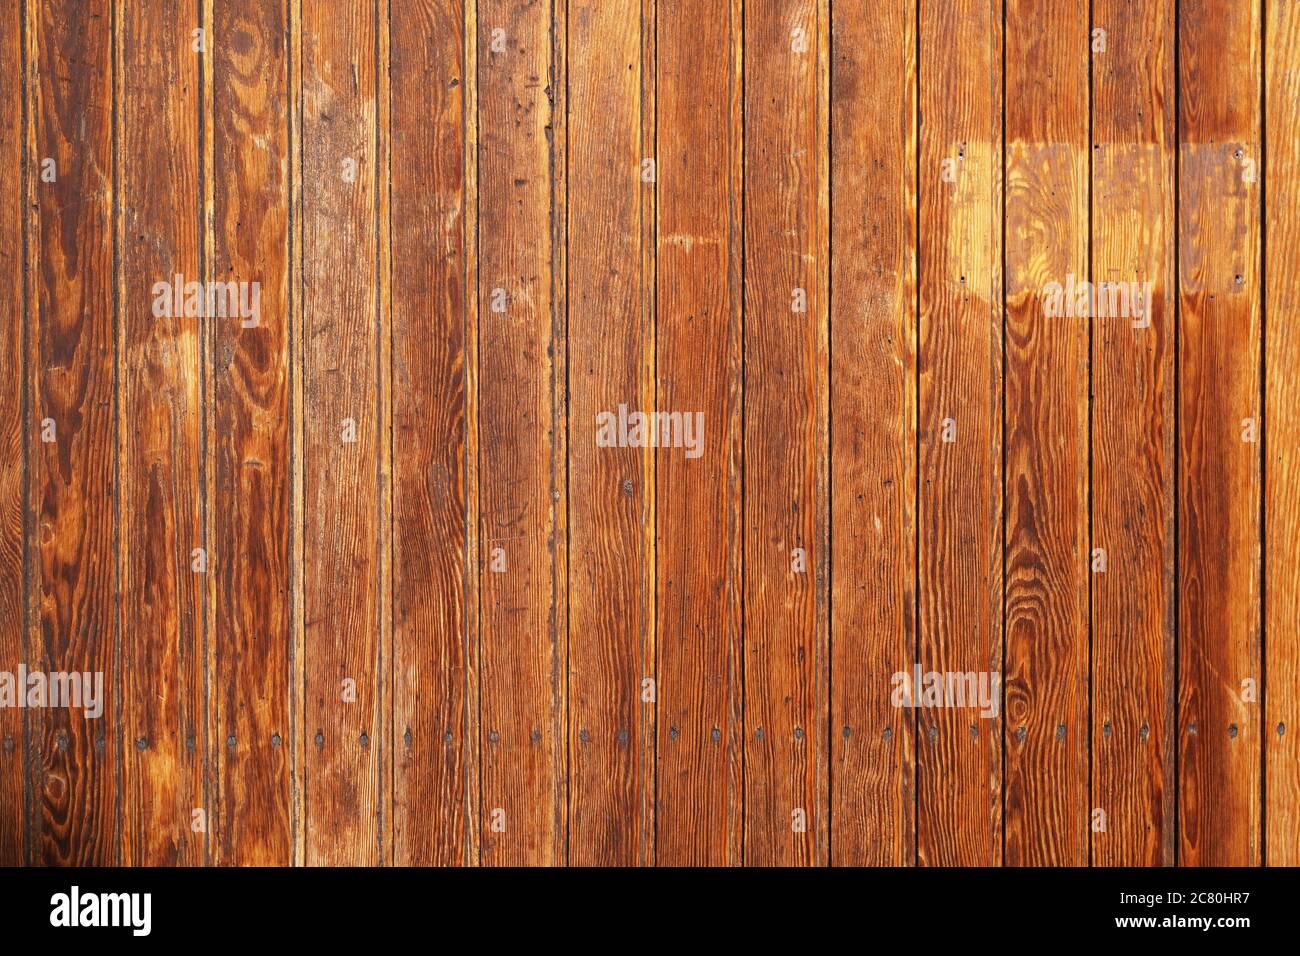 old rustic wood paneling background with vertical wooden boards or planks Stock Photo